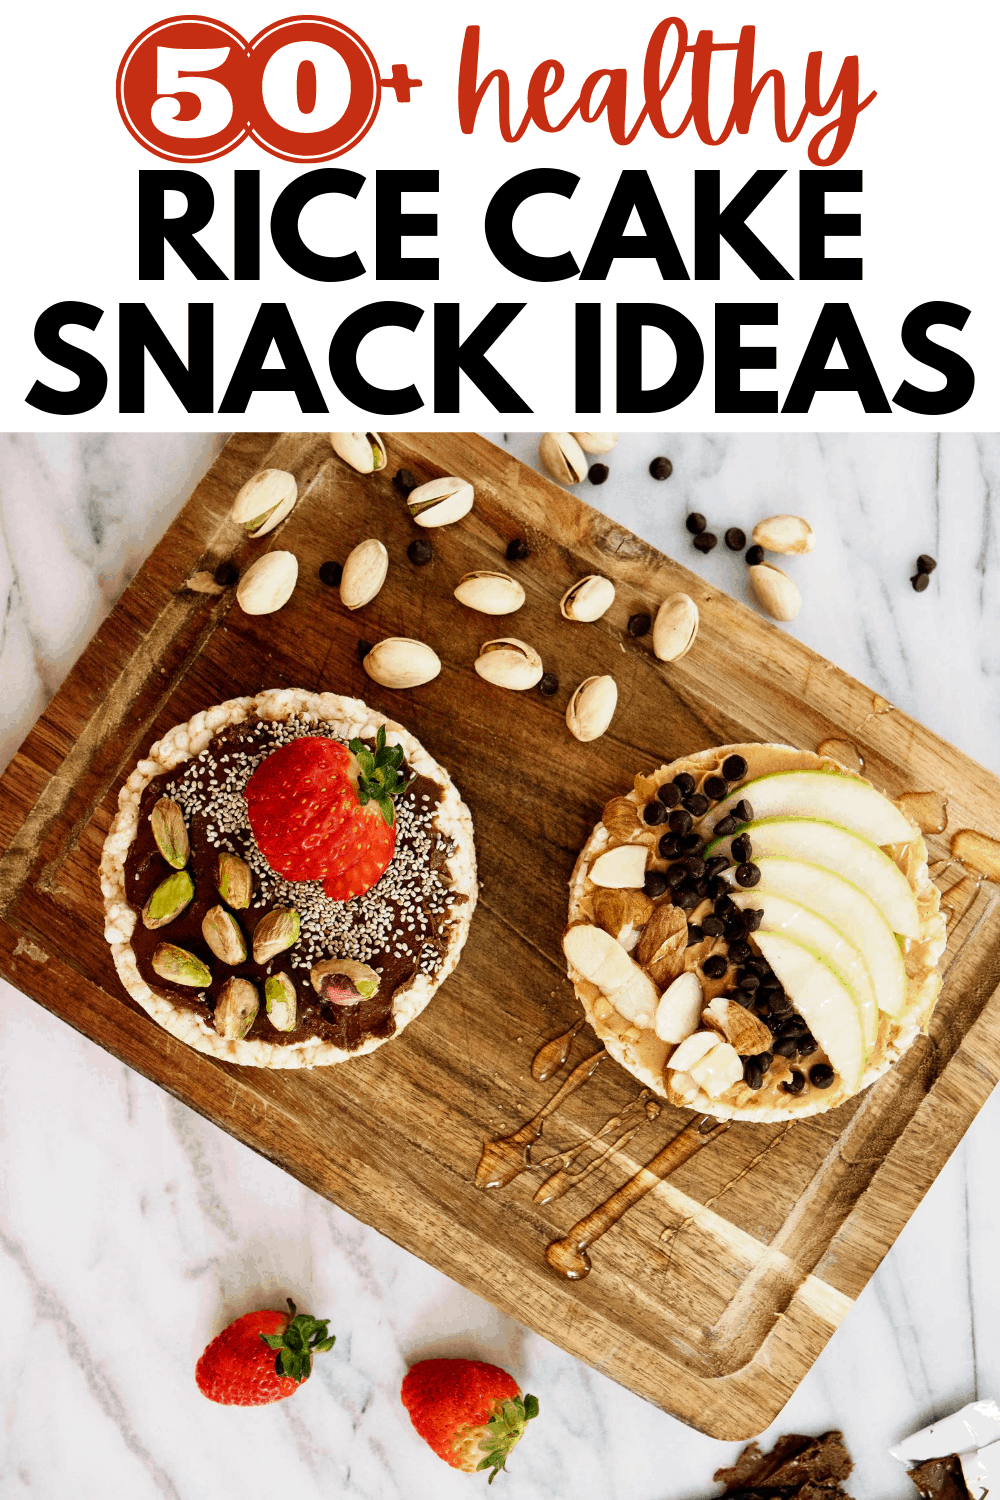 One rice cake topped with chocolate nut butter, pistachios, and strawberries, and another topped with peanut butter, almonds, apples, and chocolate chips.